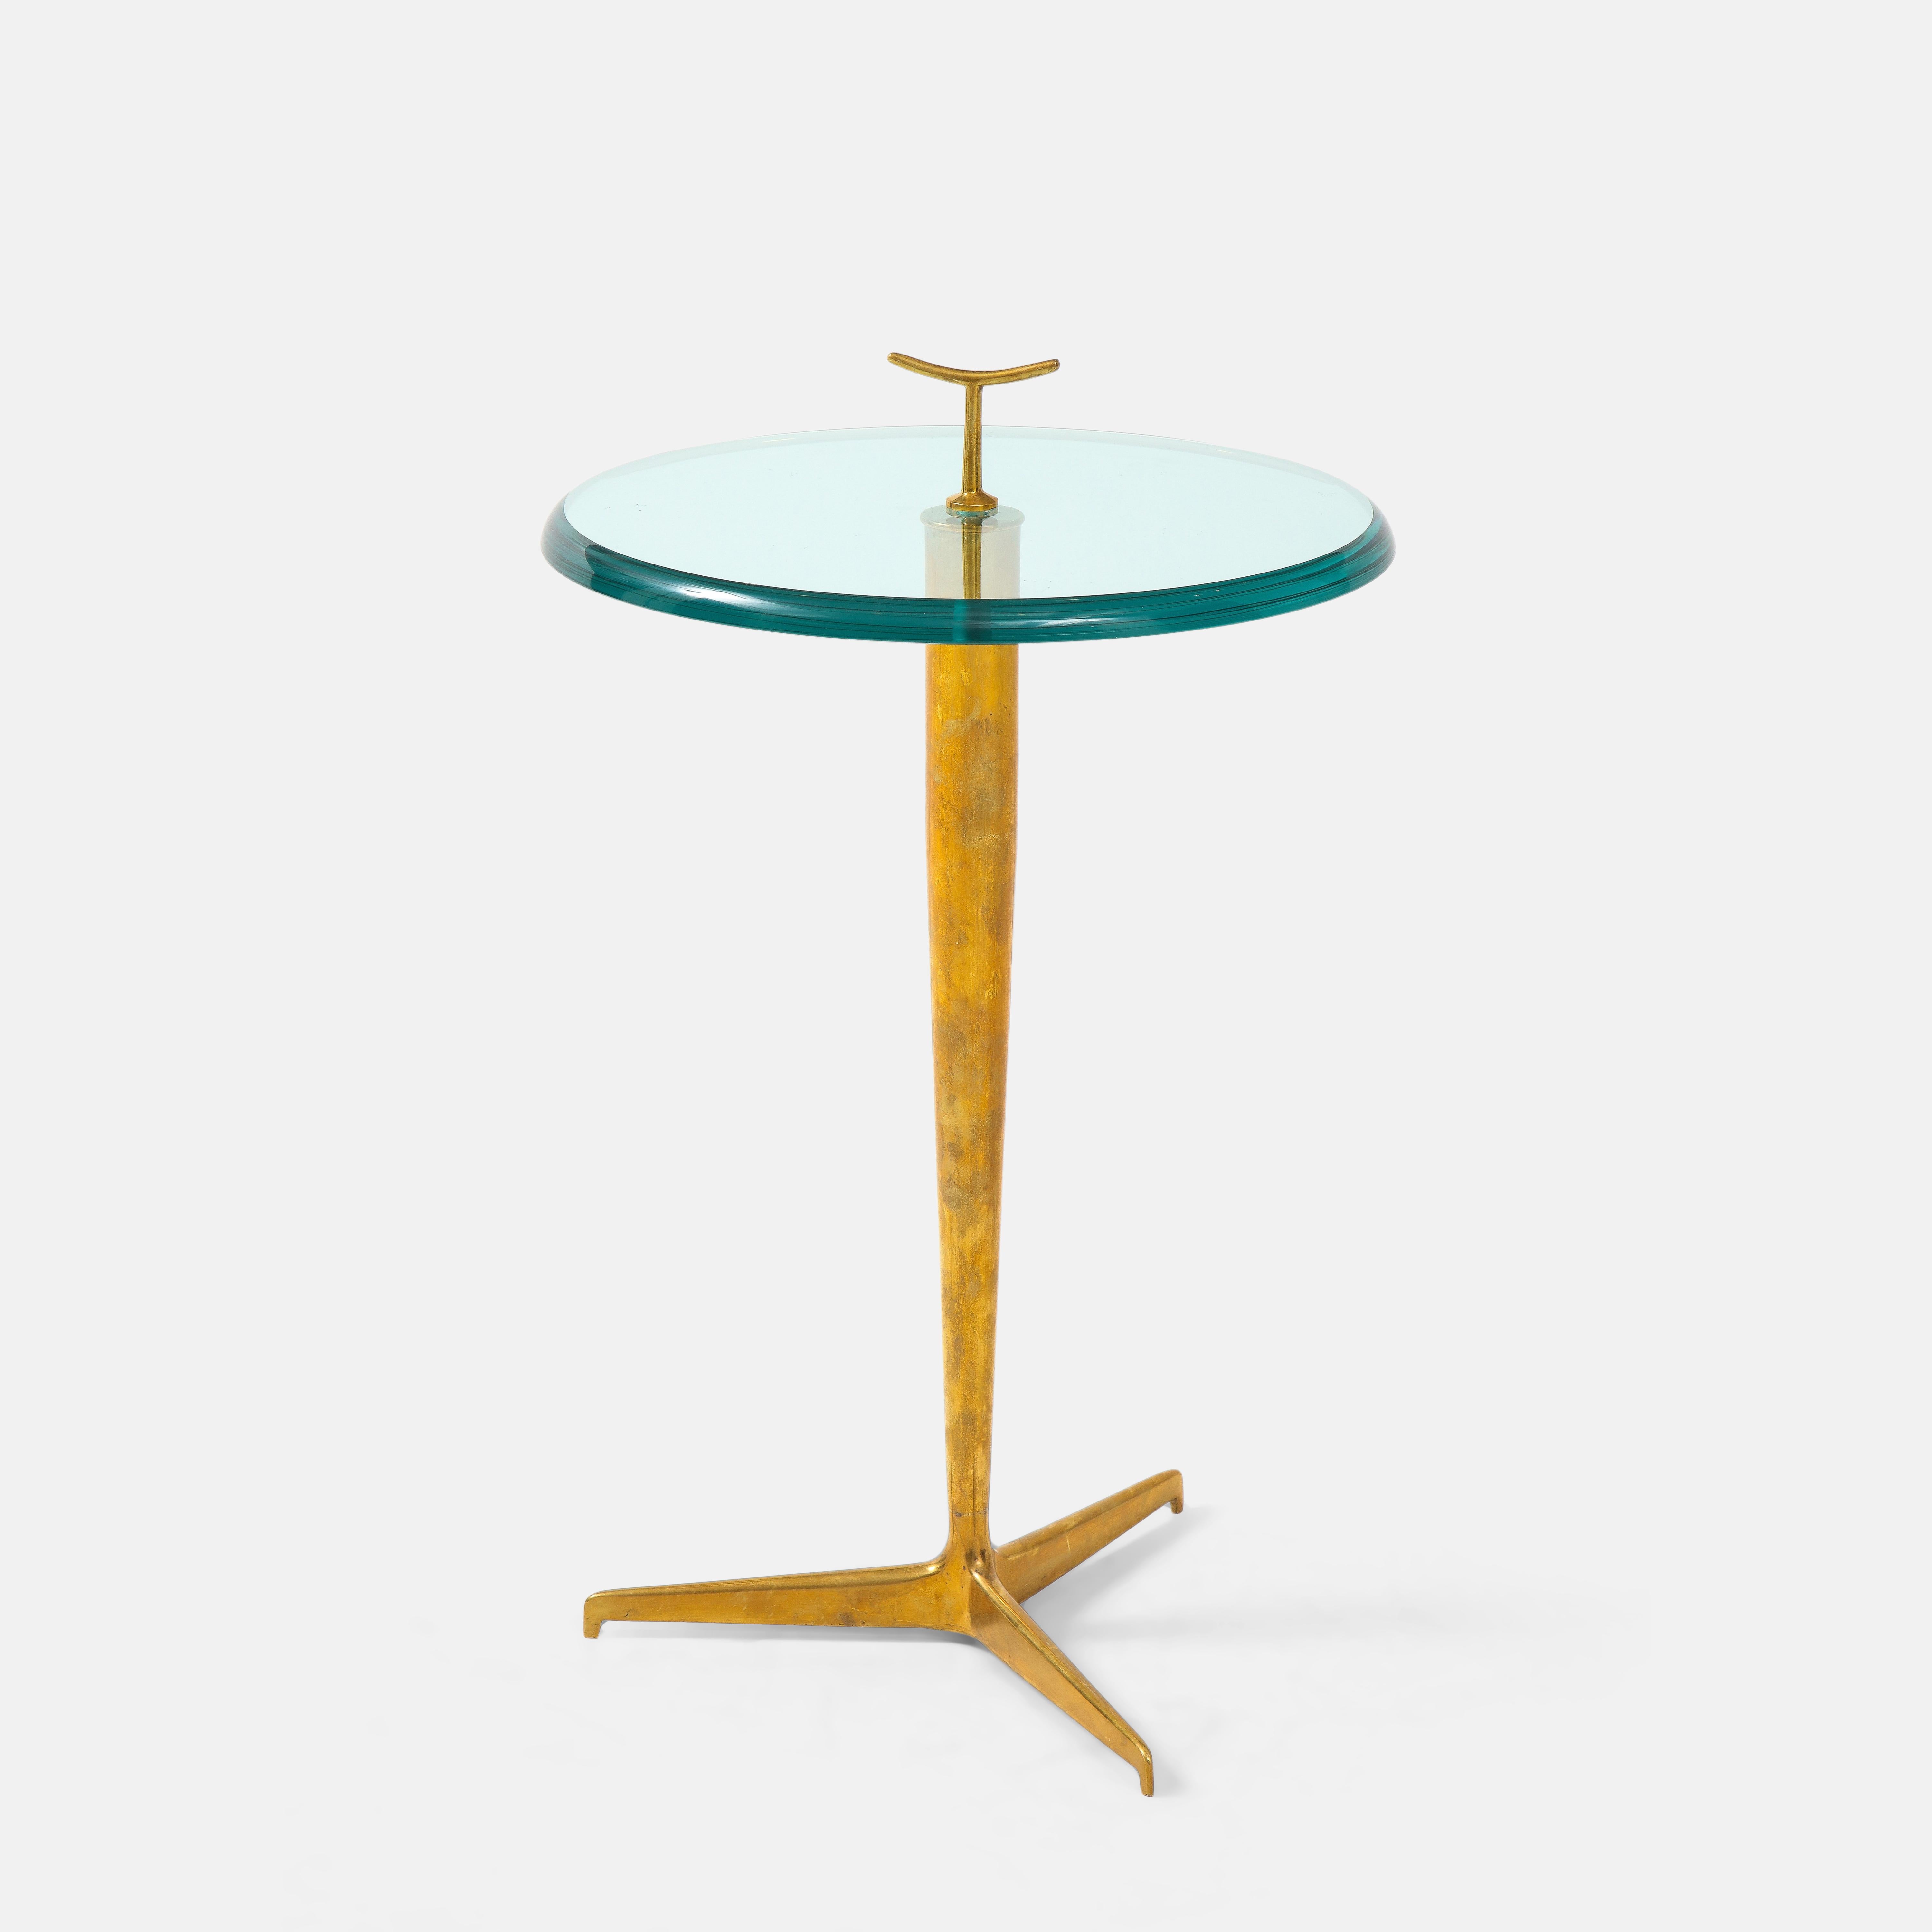 Side, occasional or drinks table in thick beveled glass with small brass handle detail on patinated brass tripod base, Italy, 2021. This chic modern side table is beautifully constructed with thick lens cut polished glass and richly patinated brass